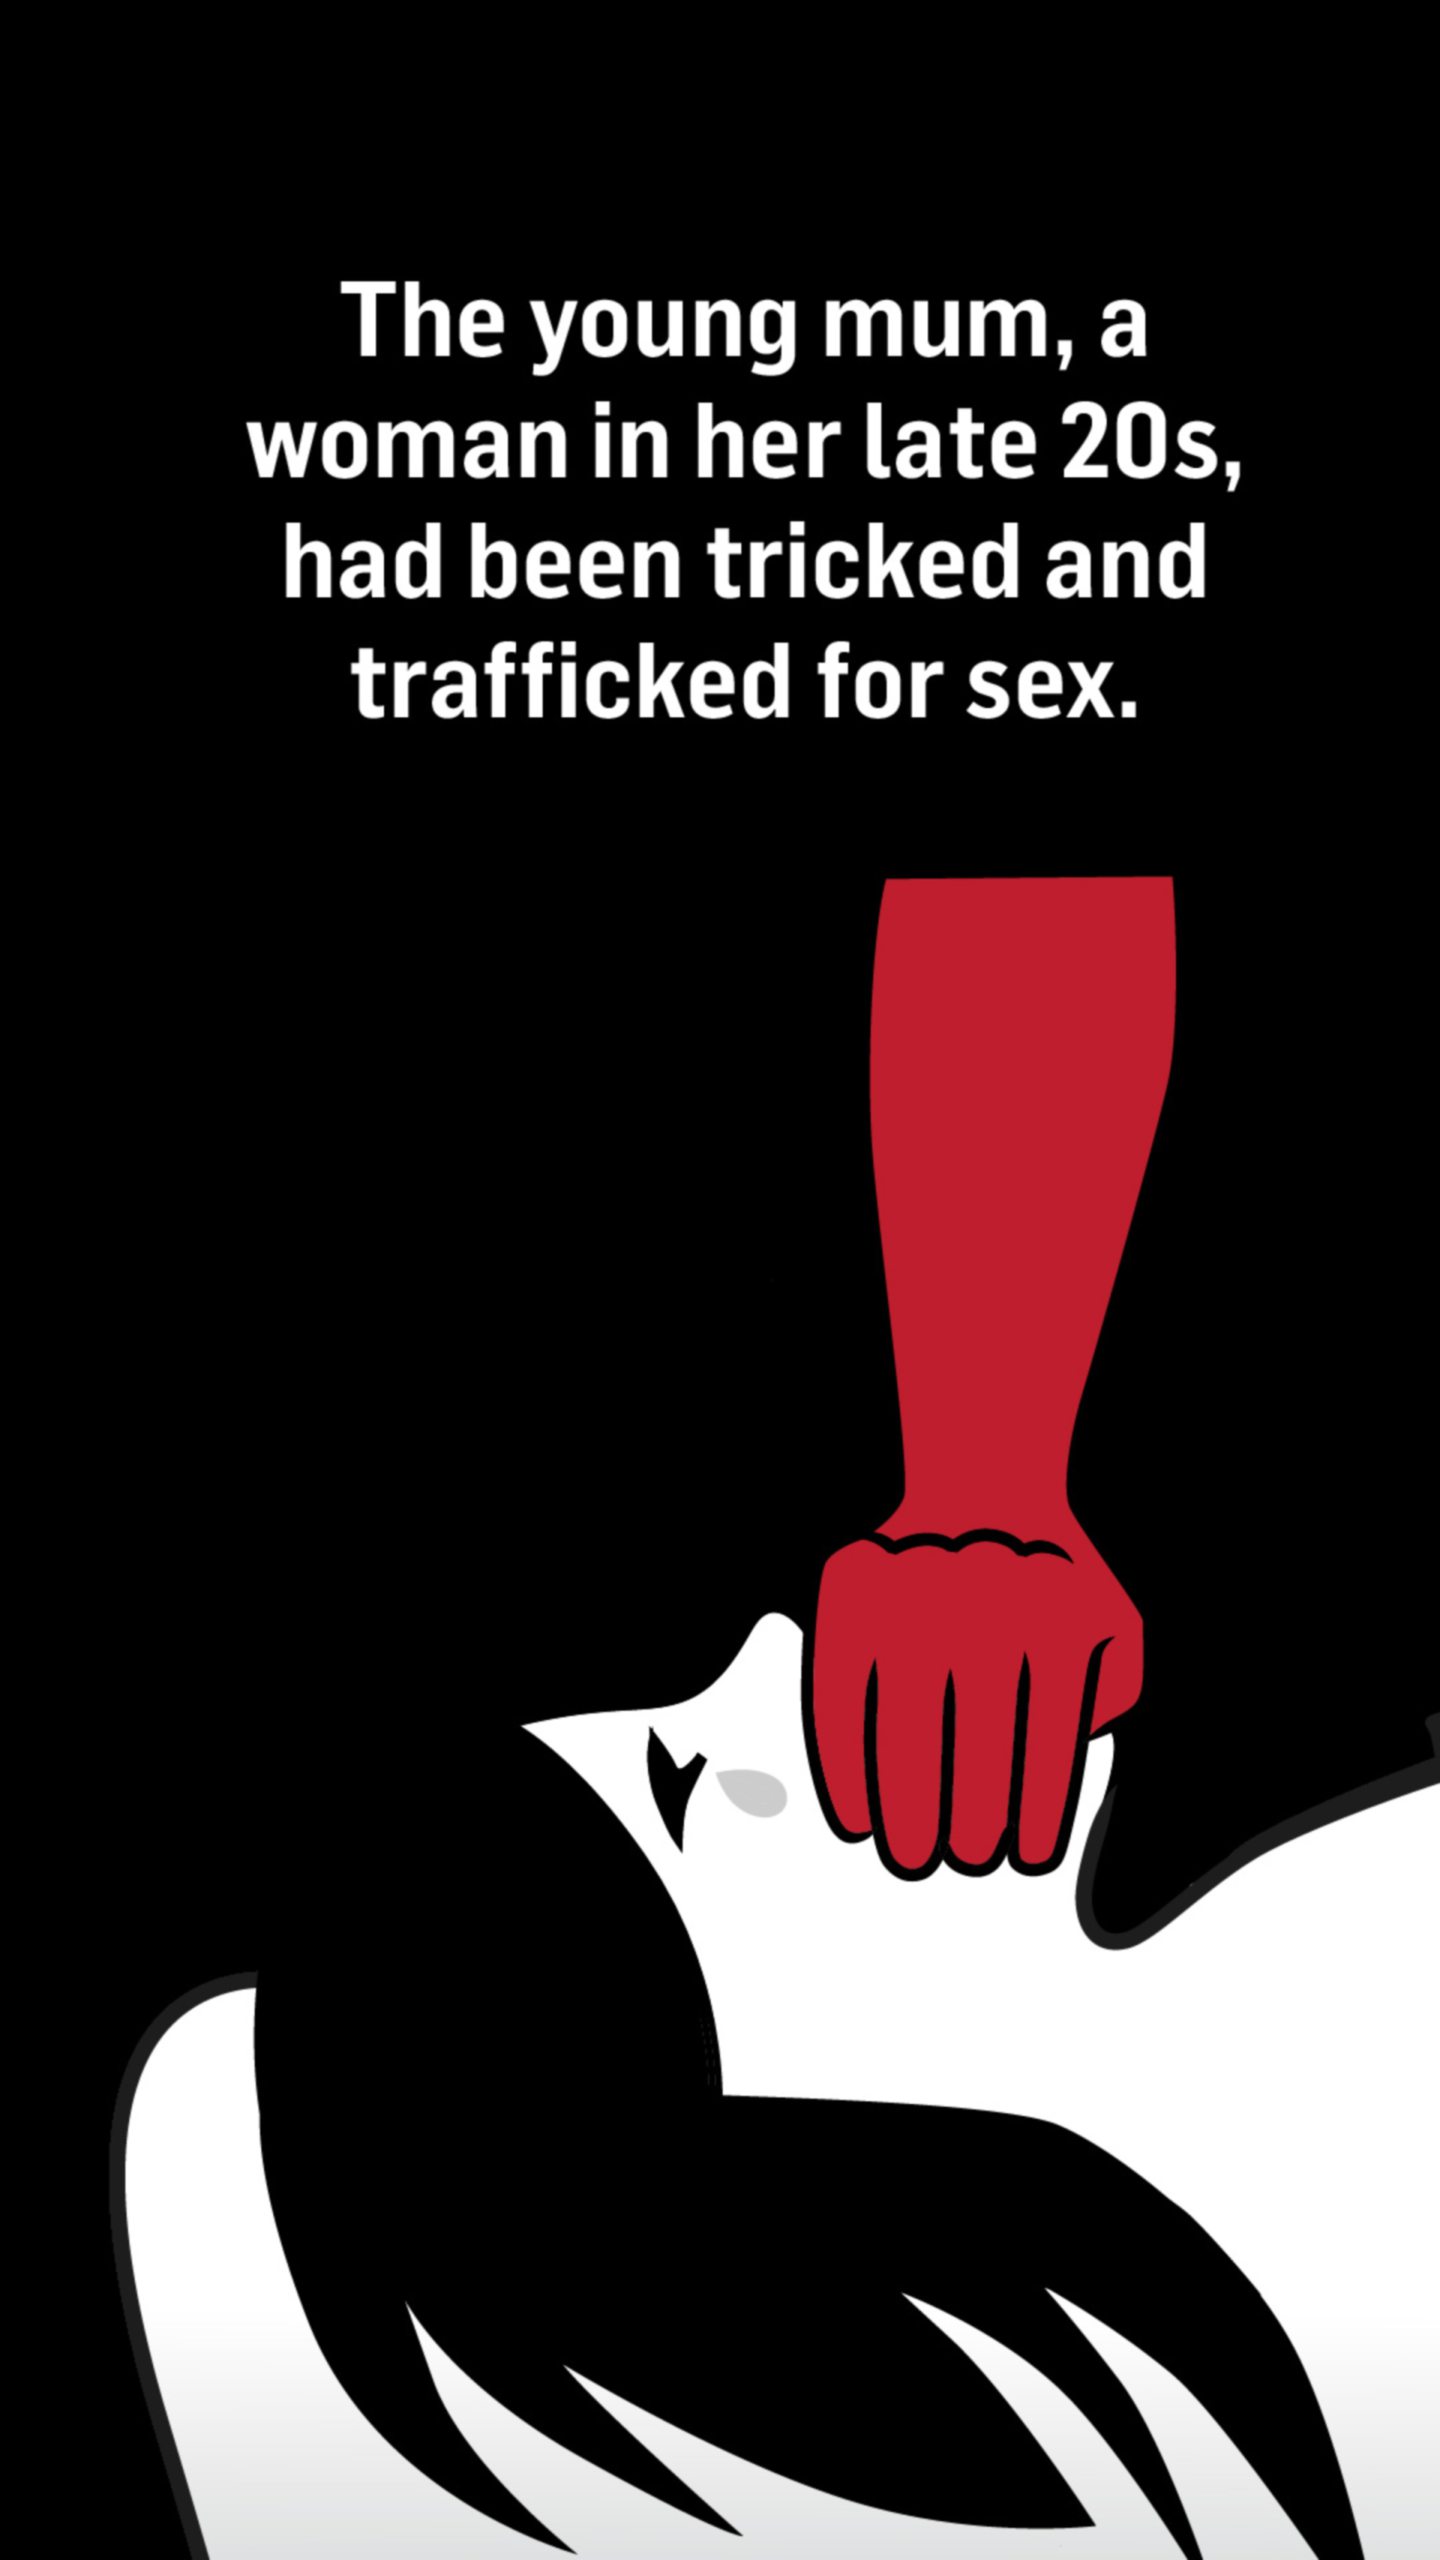 A woman lying down and a hand held over her mouth. The words above the image read: The young mum, a woman in her late 20s, had been tricked and trafficked for sex.